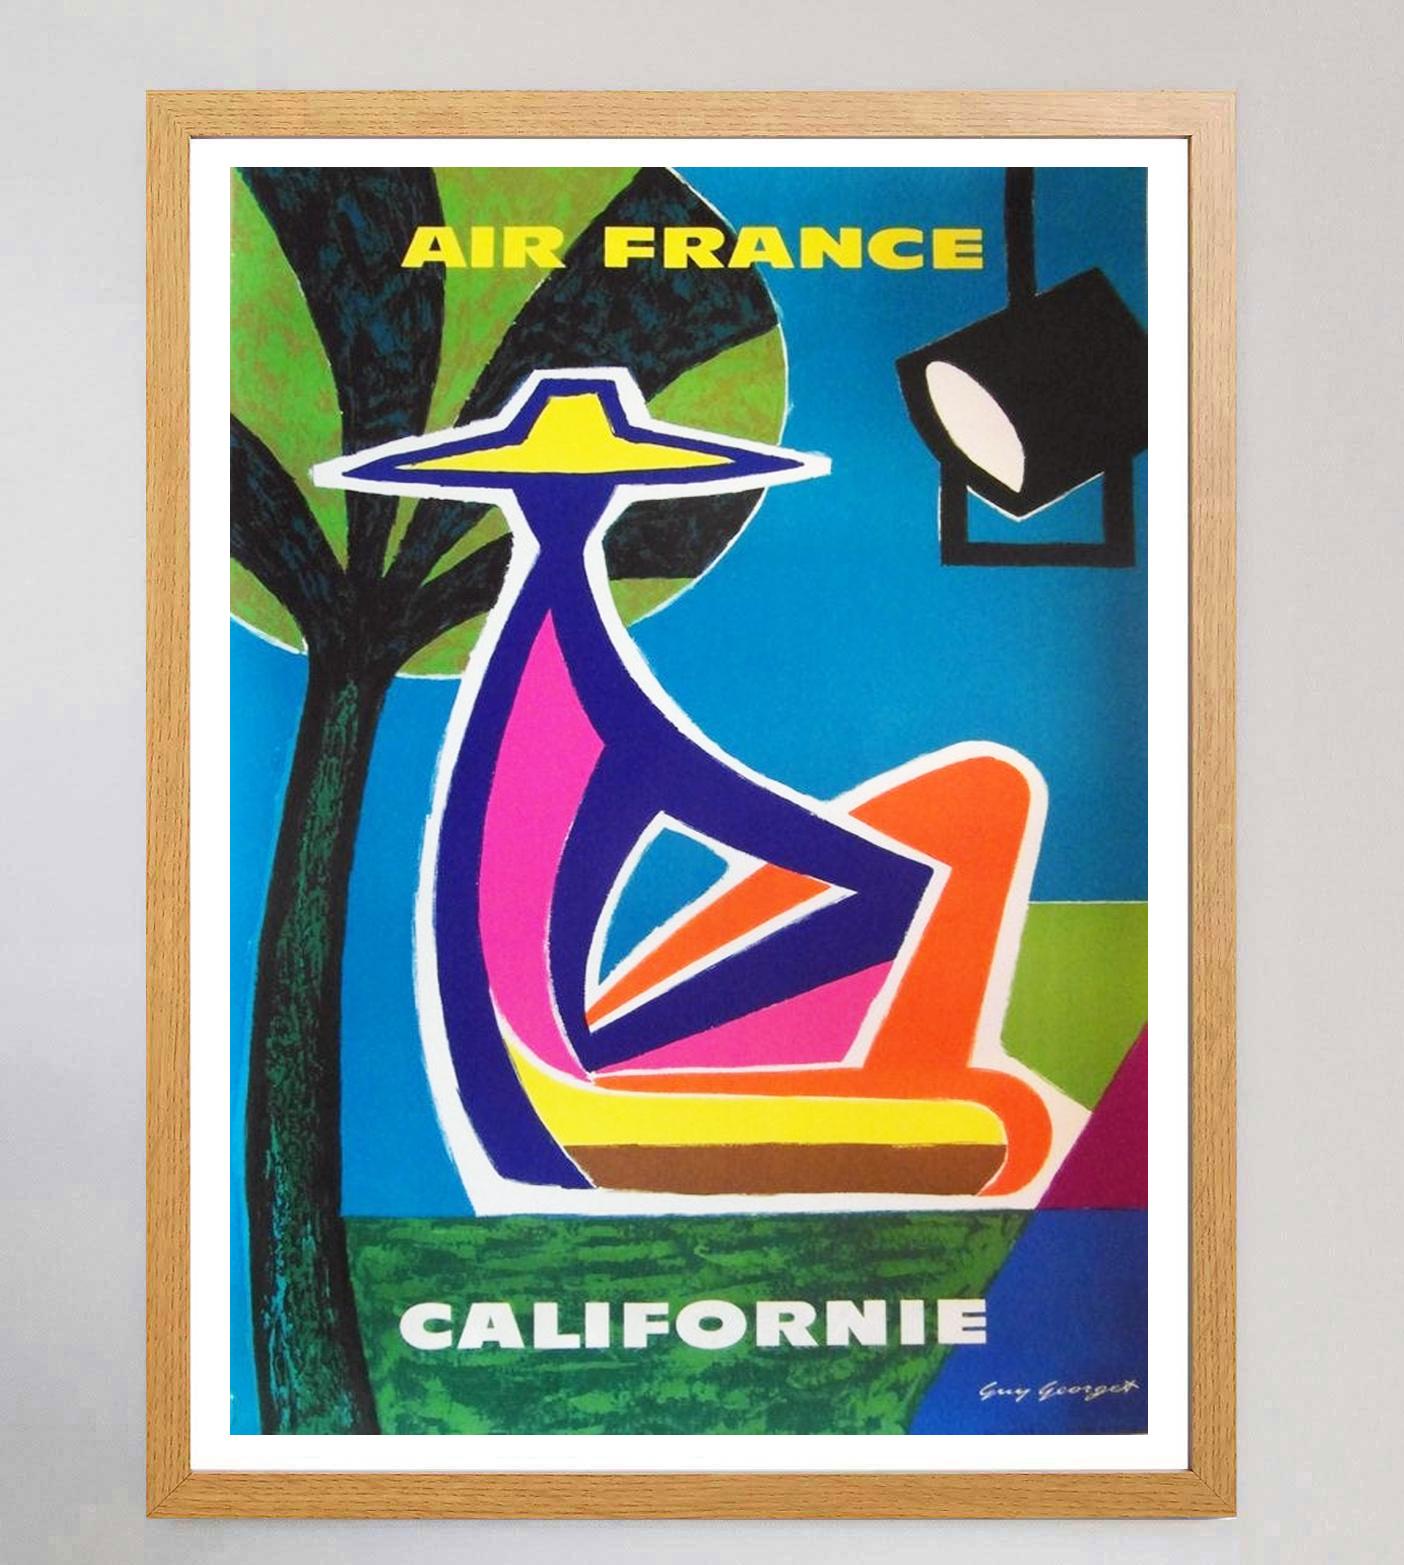 French 1961 Air France, California Original Vintage Poster